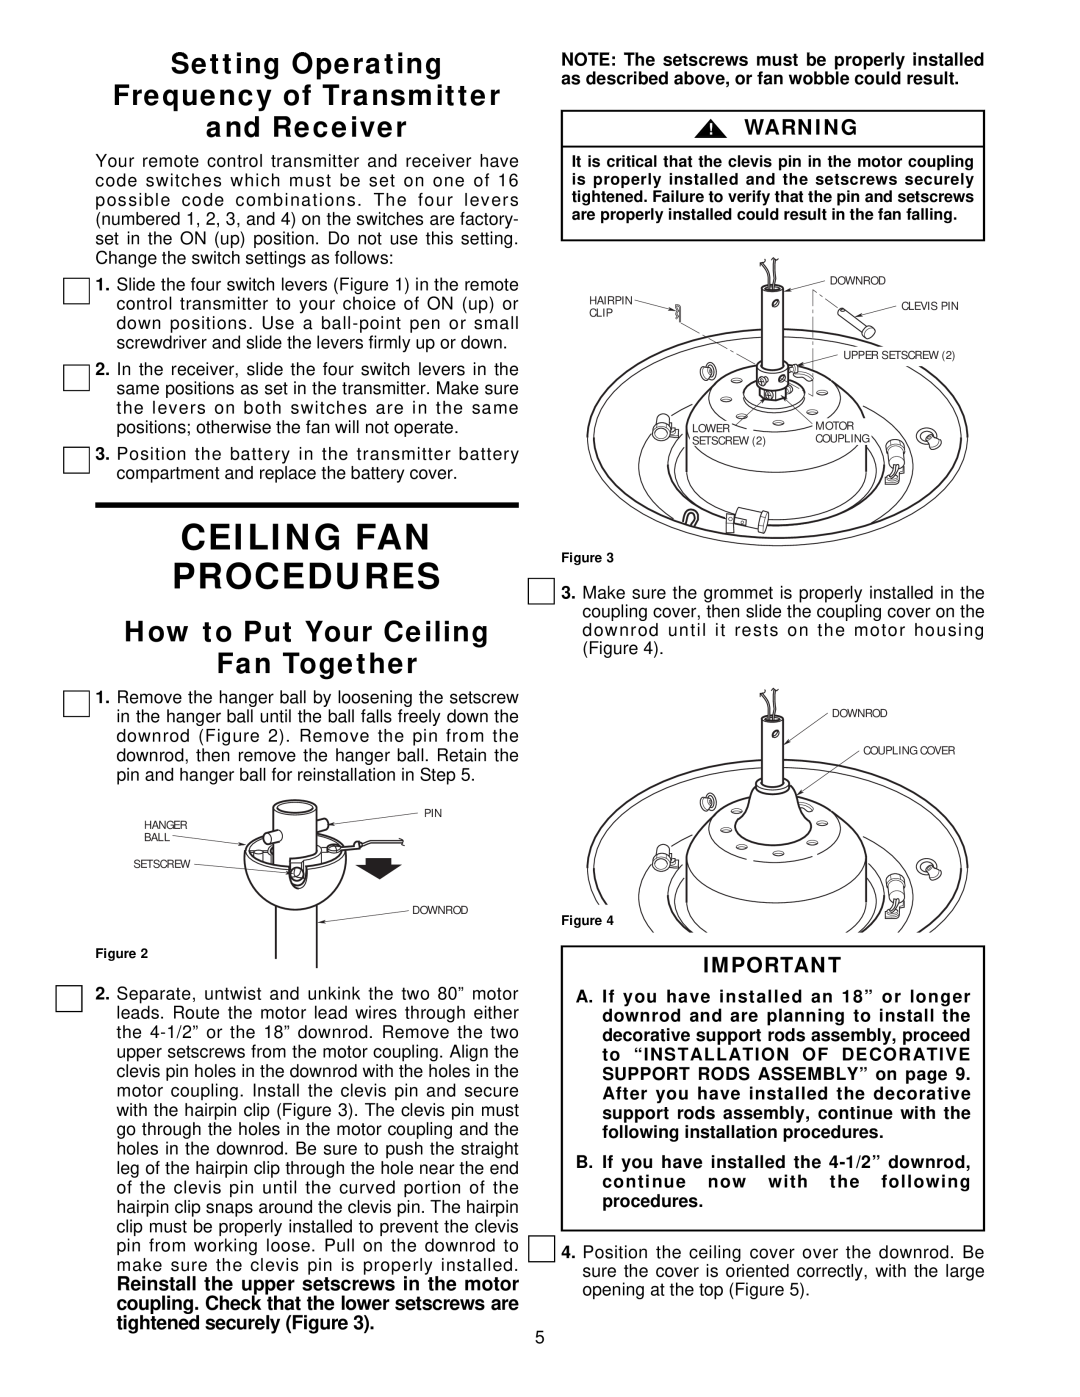 Emerson CF945PW, CF945WB, CF945HTW, CF945AB Ceiling Fan Procedures, Setting Operating Frequency of Transmitter, and Receiver 